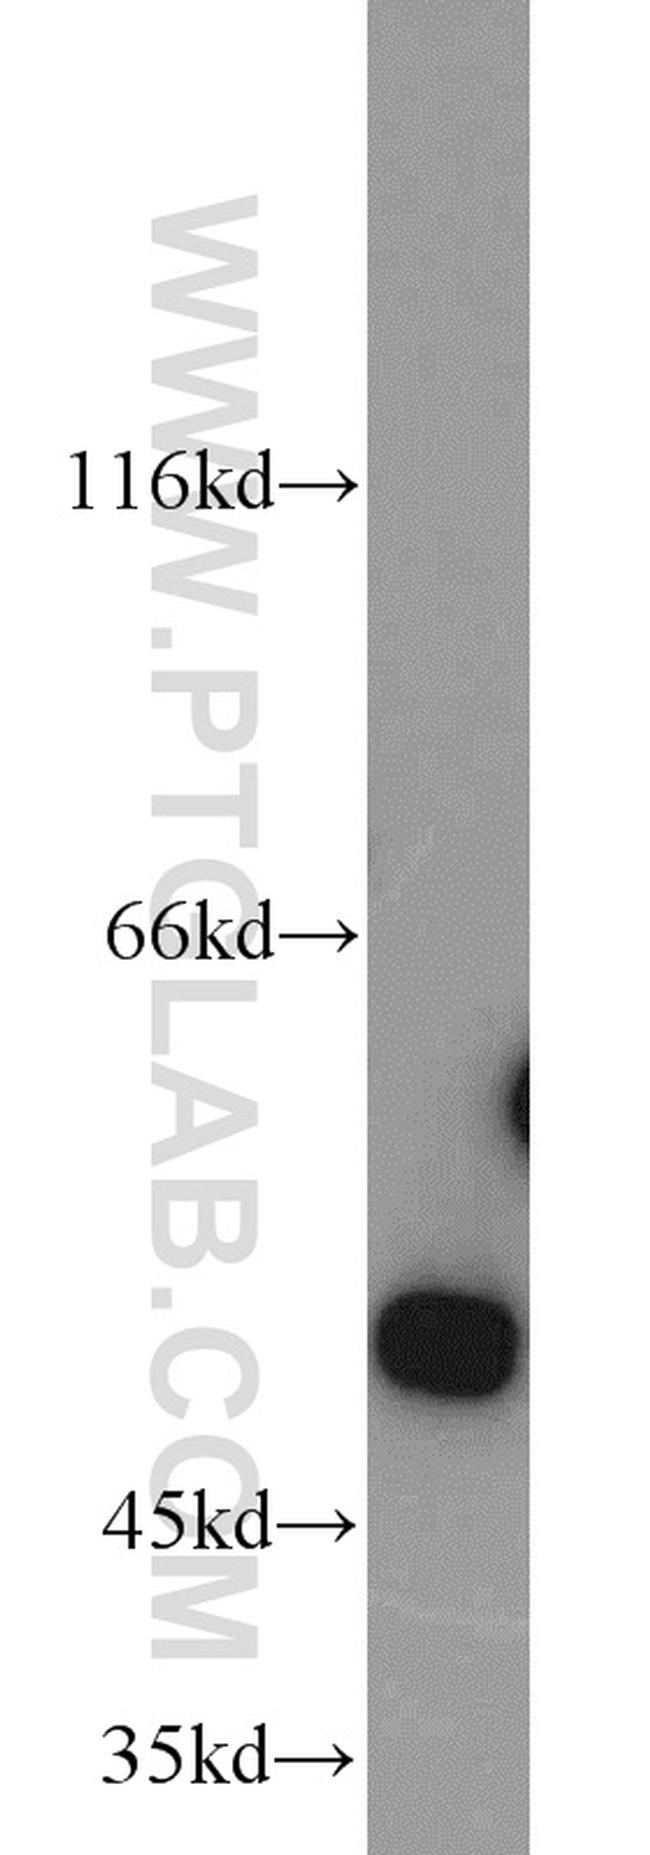 Citrate synthase Antibody in Western Blot (WB)